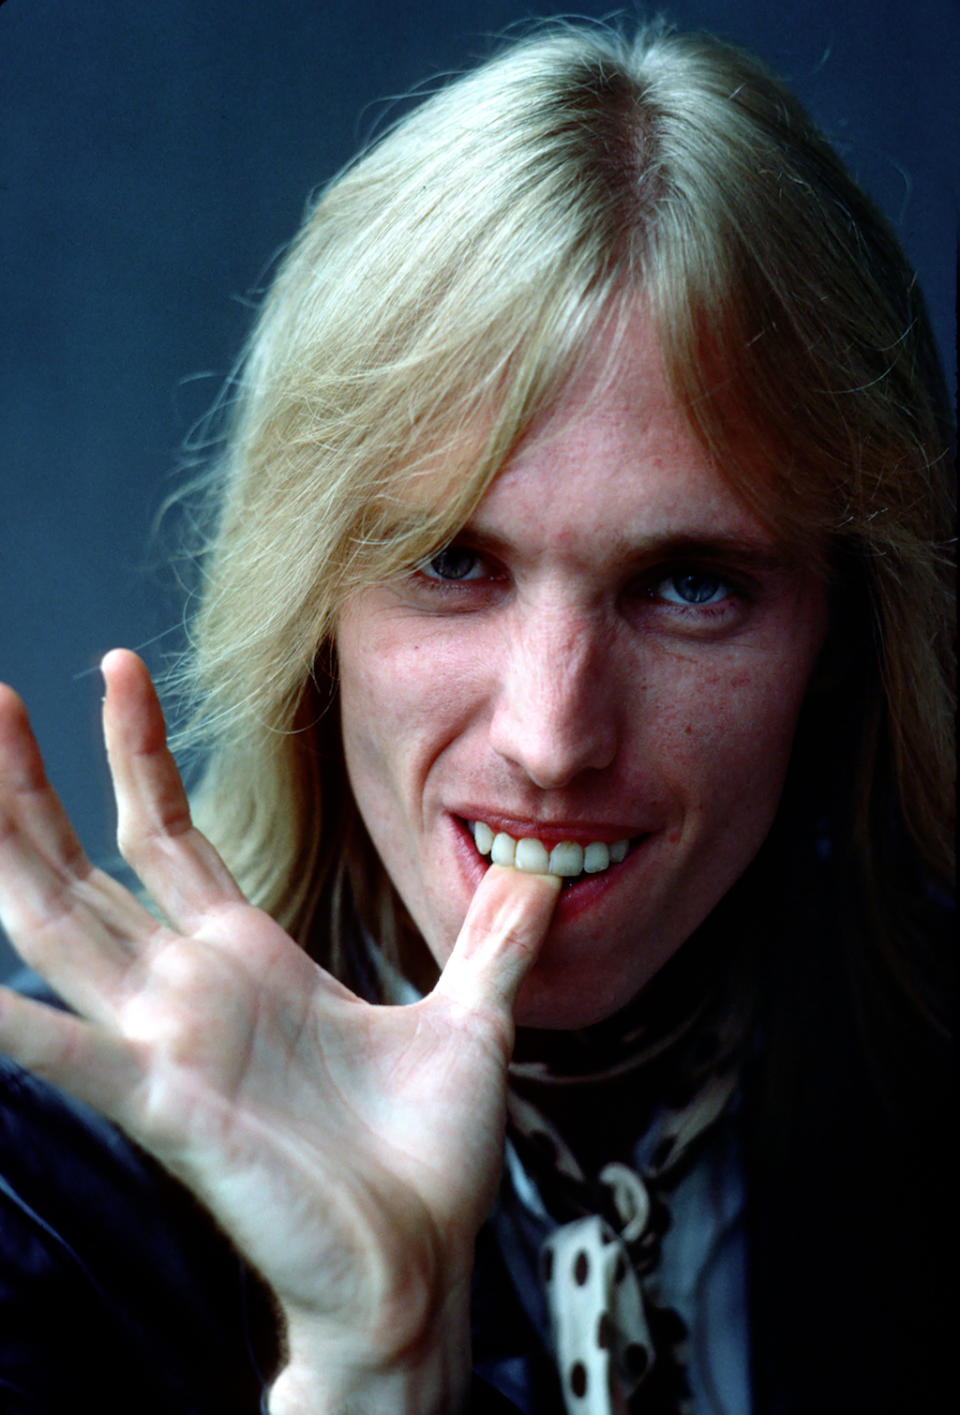 Tom Petty. (Photo by Michael Ochs Archives/Getty Images)